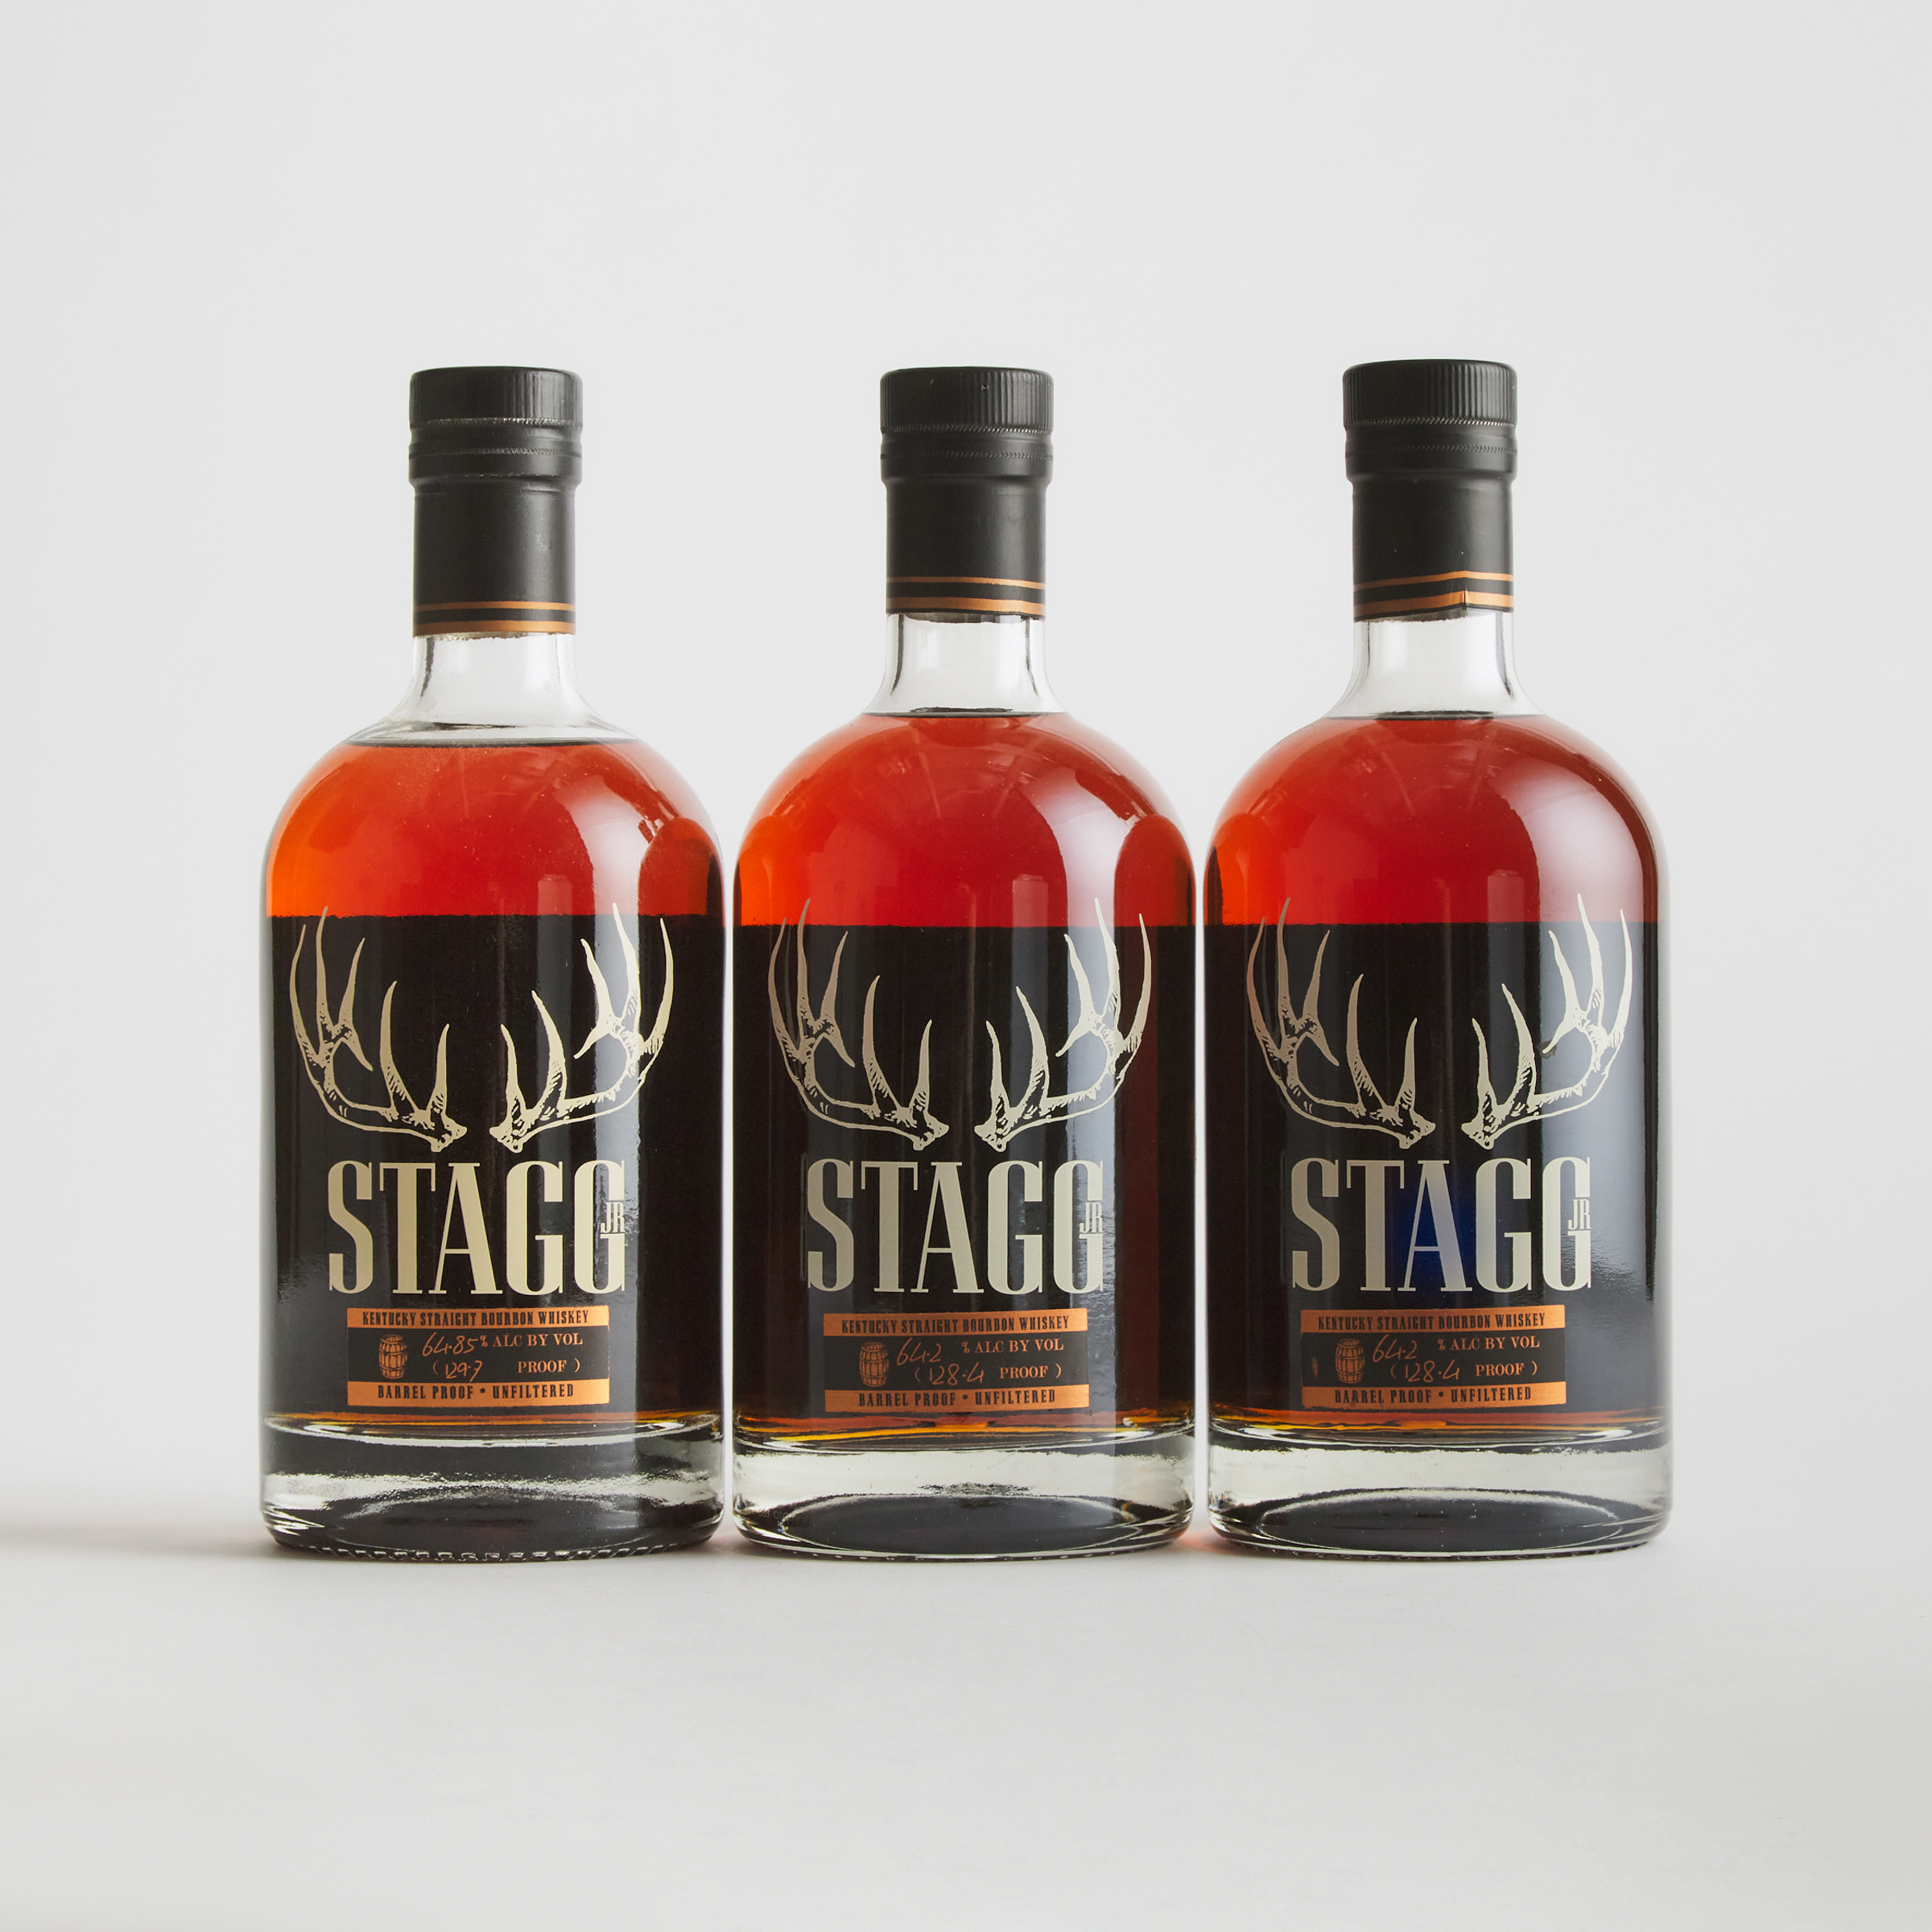 STAGG JR. KENTUCKY STRAIGHT BOURBON WHISKEY (TWO 750 ML)
STAGG JR. KENTUCKY STRAIGHT BOURBON WHISKEY (ONE 750 ML)